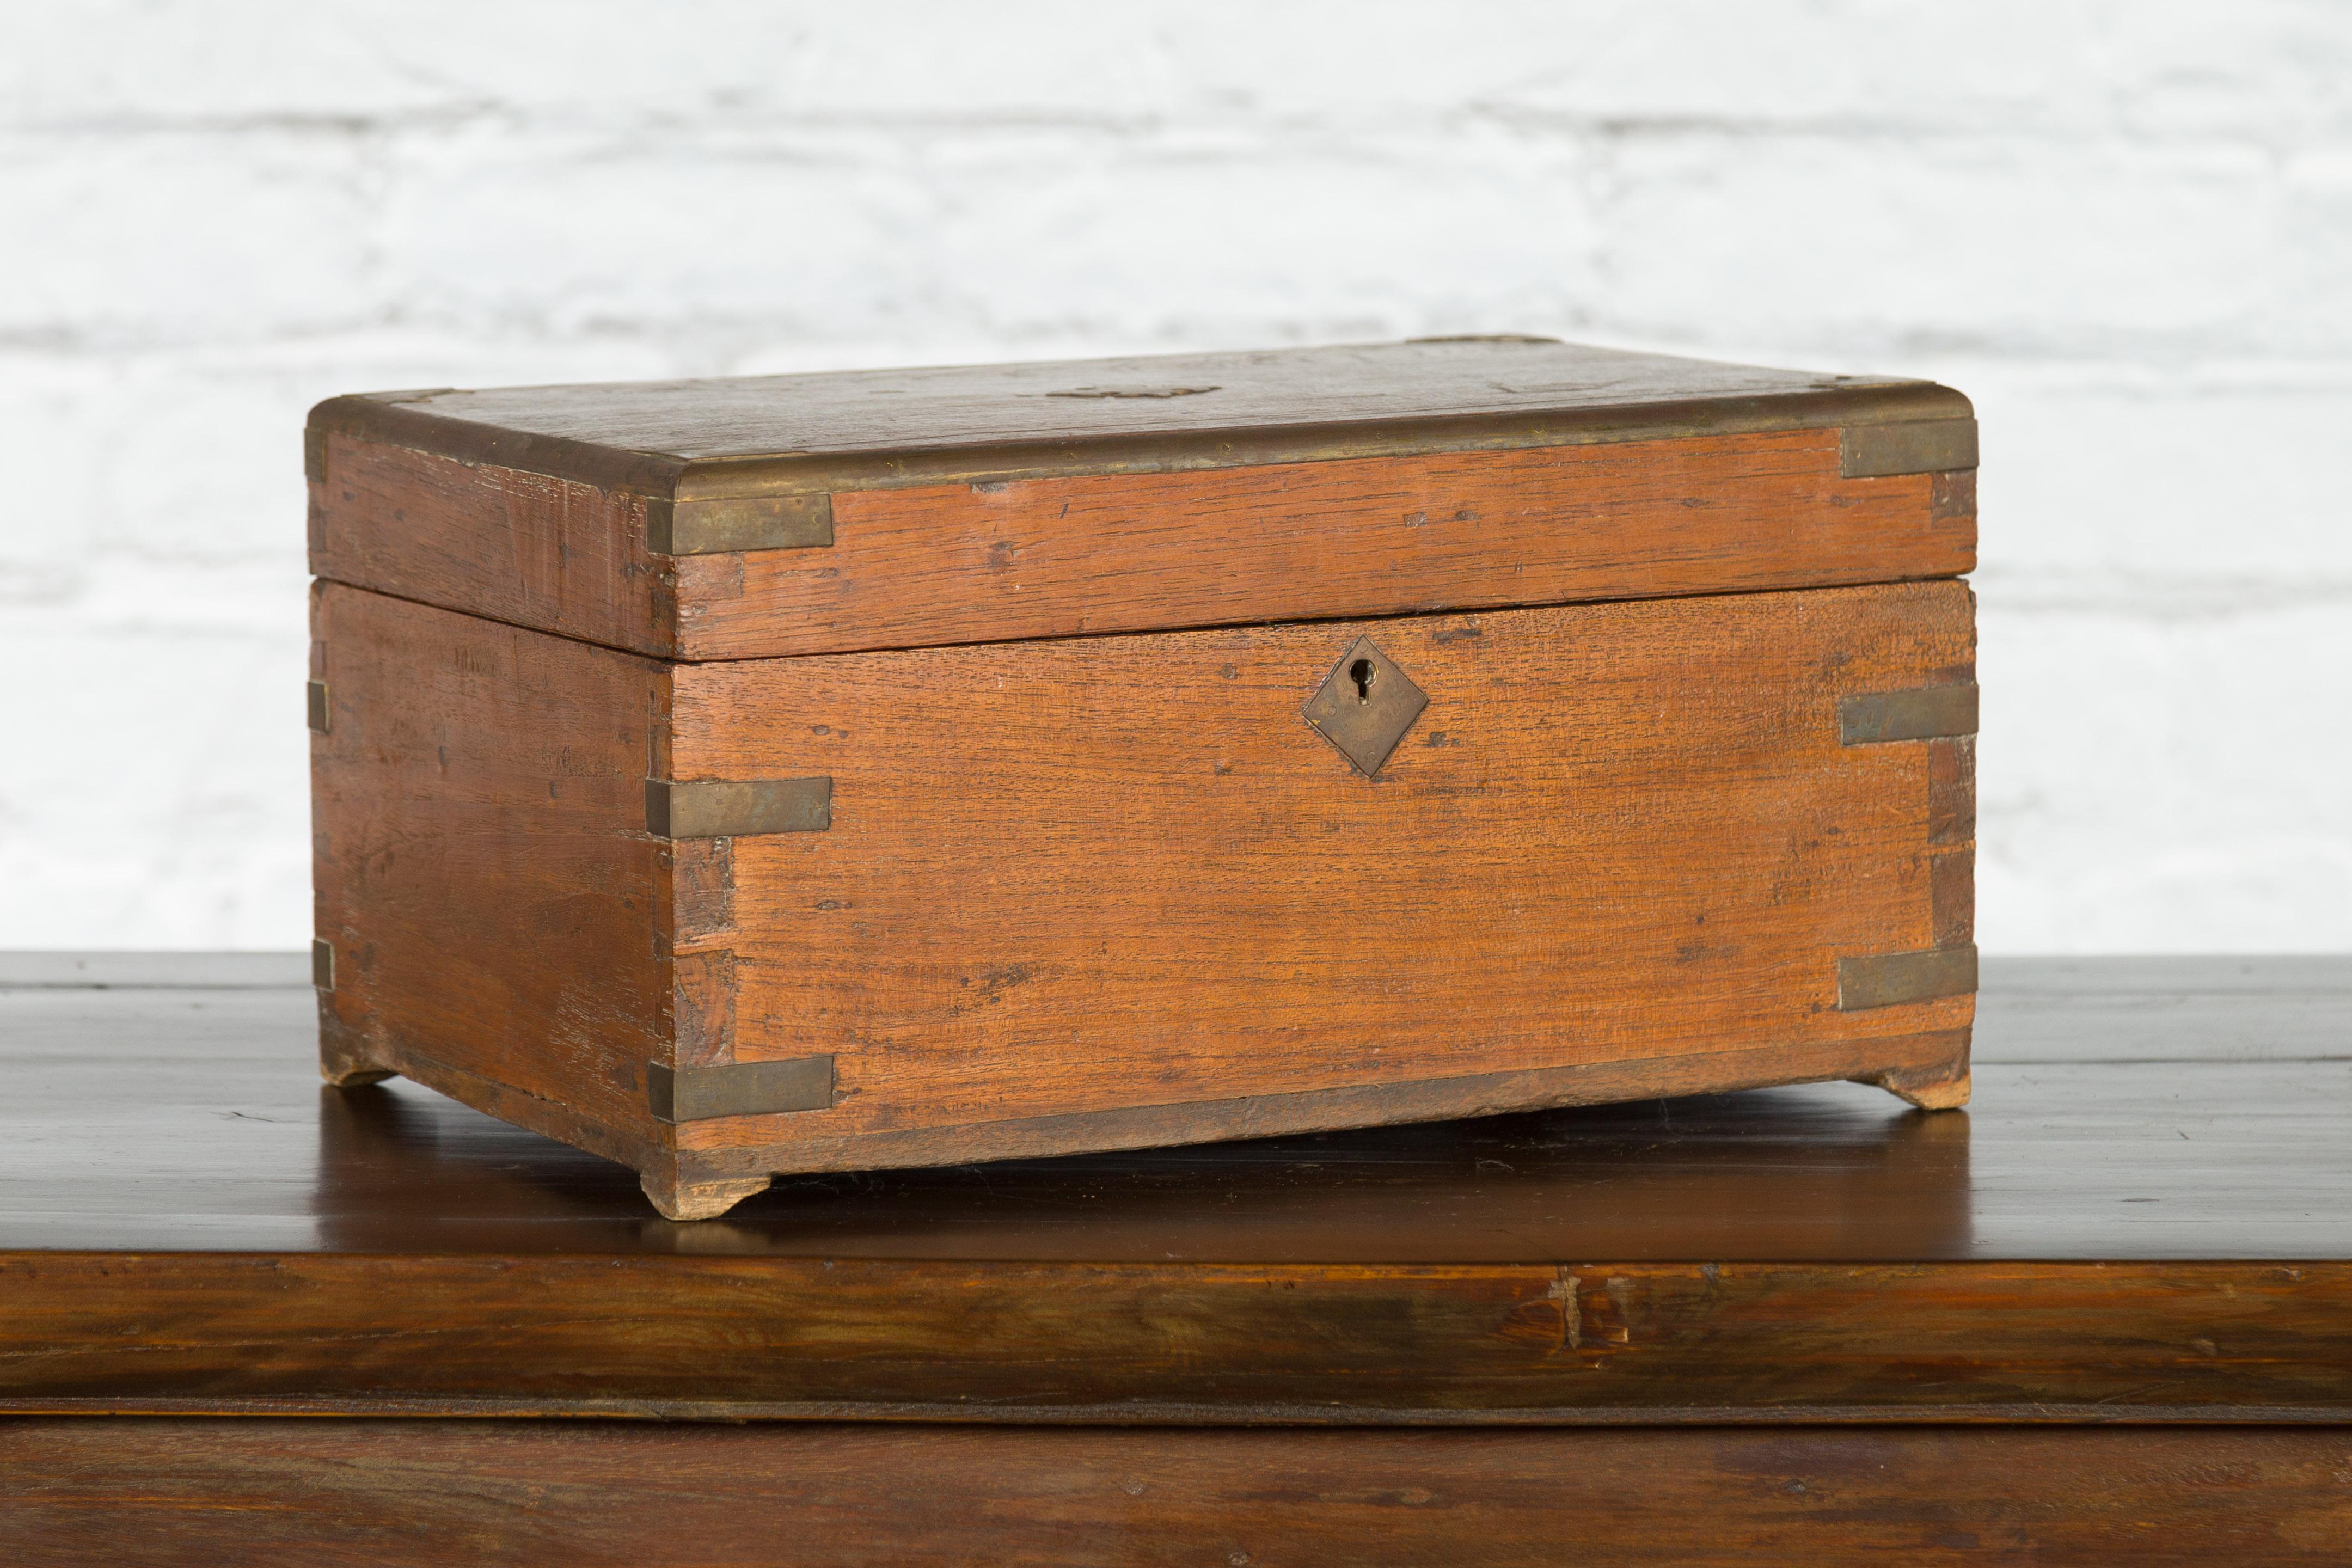 An antique Indian handmade jewelry box from the 19th century with brass hardware, bracket feet and partitioned interior. Created in India during the 19th century, this hand-crafted decorative treasure chest can be used as a jewelry box, stationary